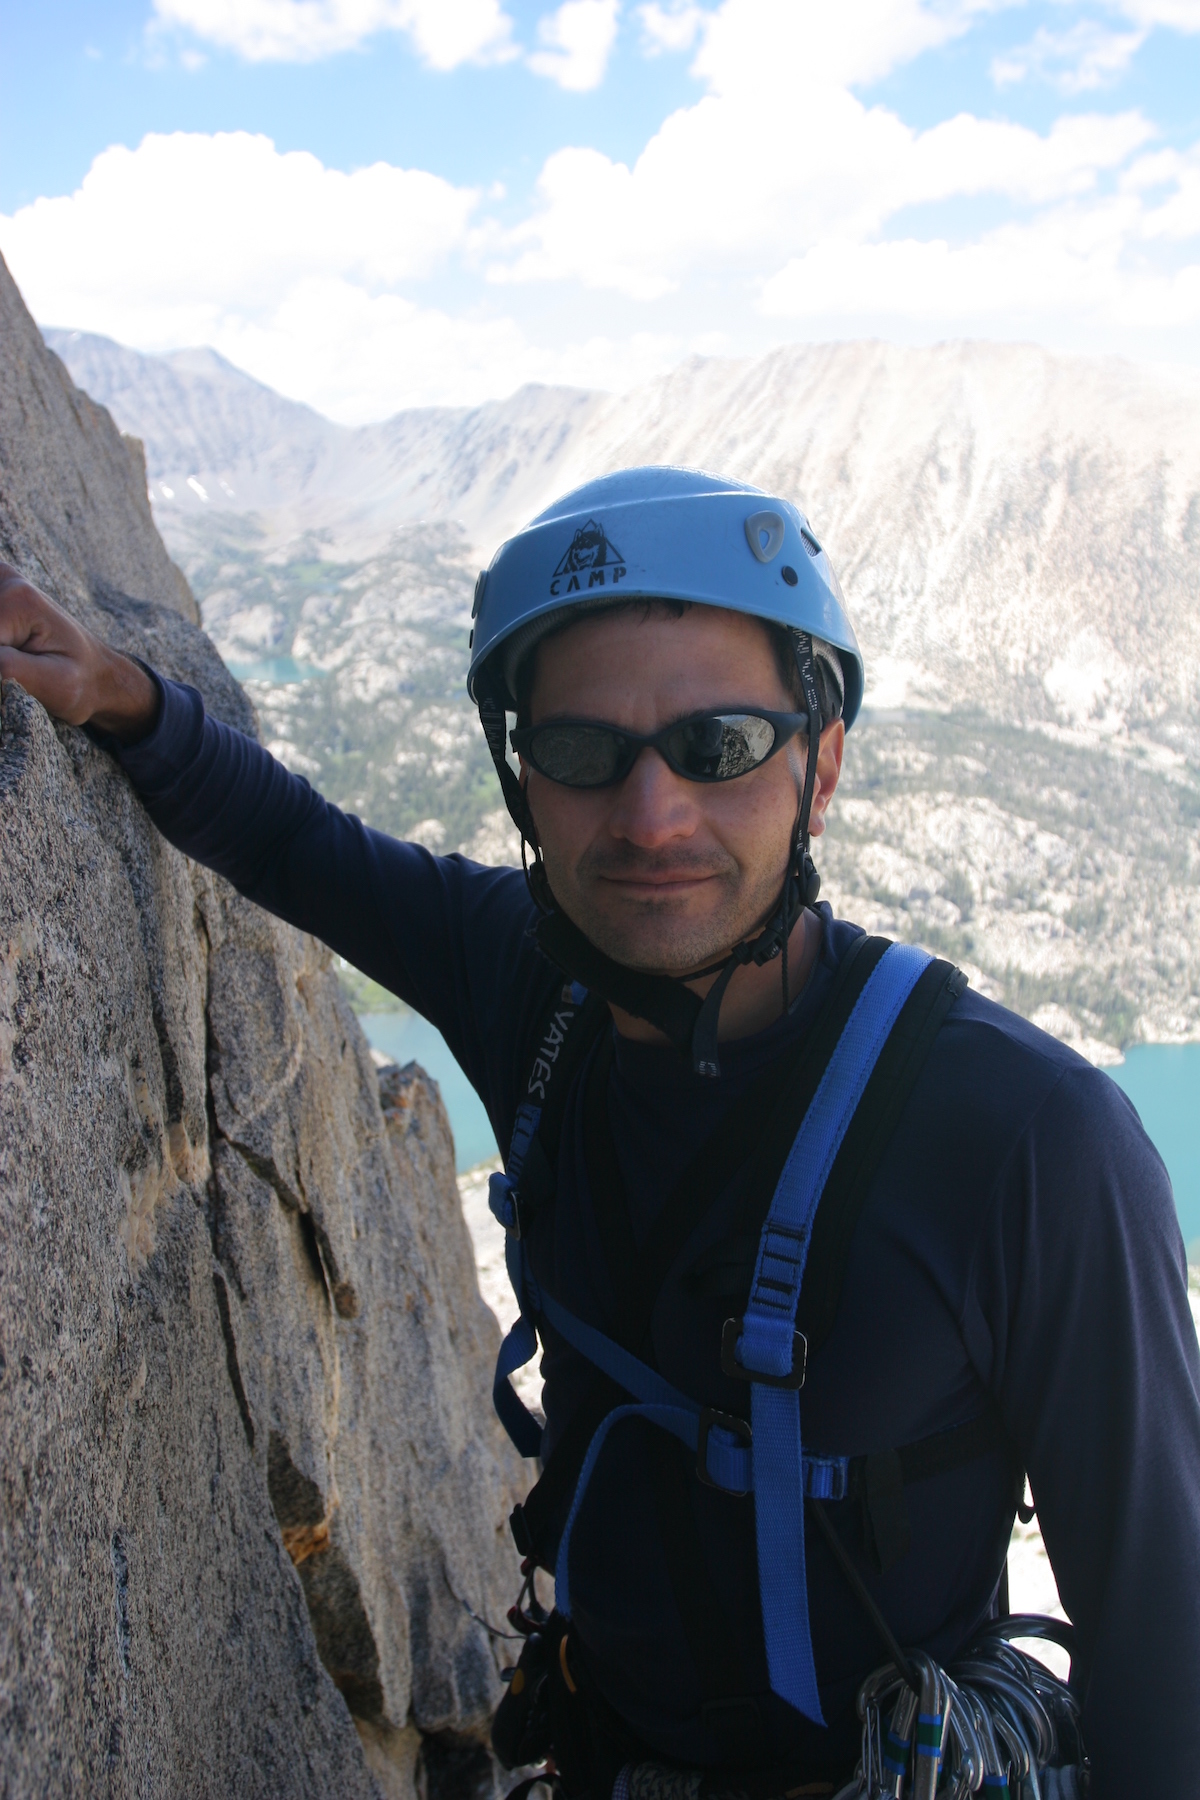 Michael Ybarra climbed extensively in the Sierra Nevada. In June 2012 he passed away during a solo traverse of the Sawtooth Ridge near Bridgeport, Cailfornia. A longtime journalist, he reported on outdoor adventure for The Wall Street Journal, among other publications. For a few of his own stories, see Alpinist 36, 40 and 43. [Photo] Misha Logvinov